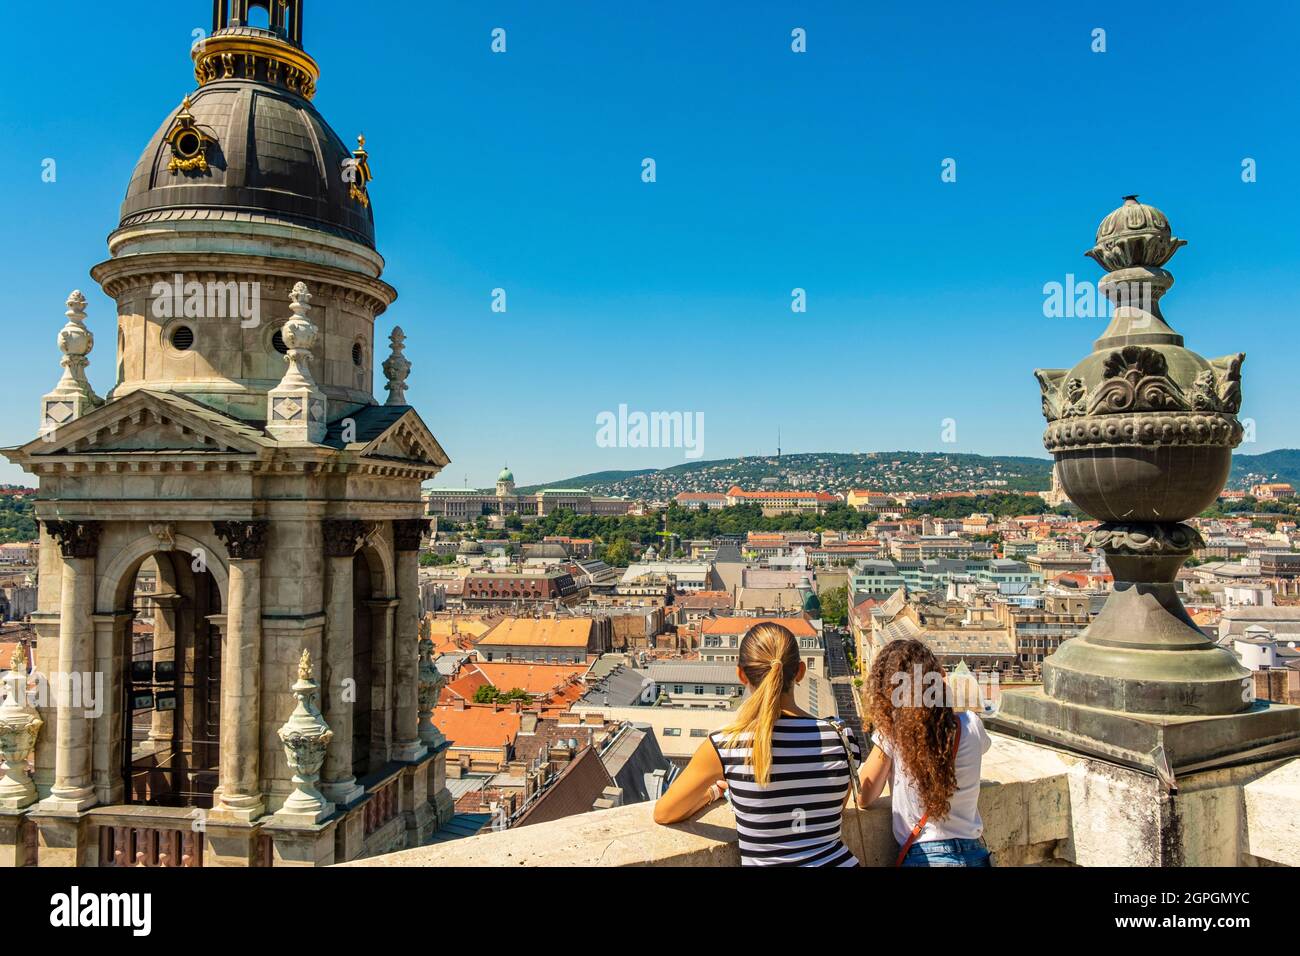 Hungary, Budapest, listed as World Heritage by UNESCO, Pest district, St. Stephen's Basilica (Szent Istvan bazilika), view from the bell tower Stock Photo